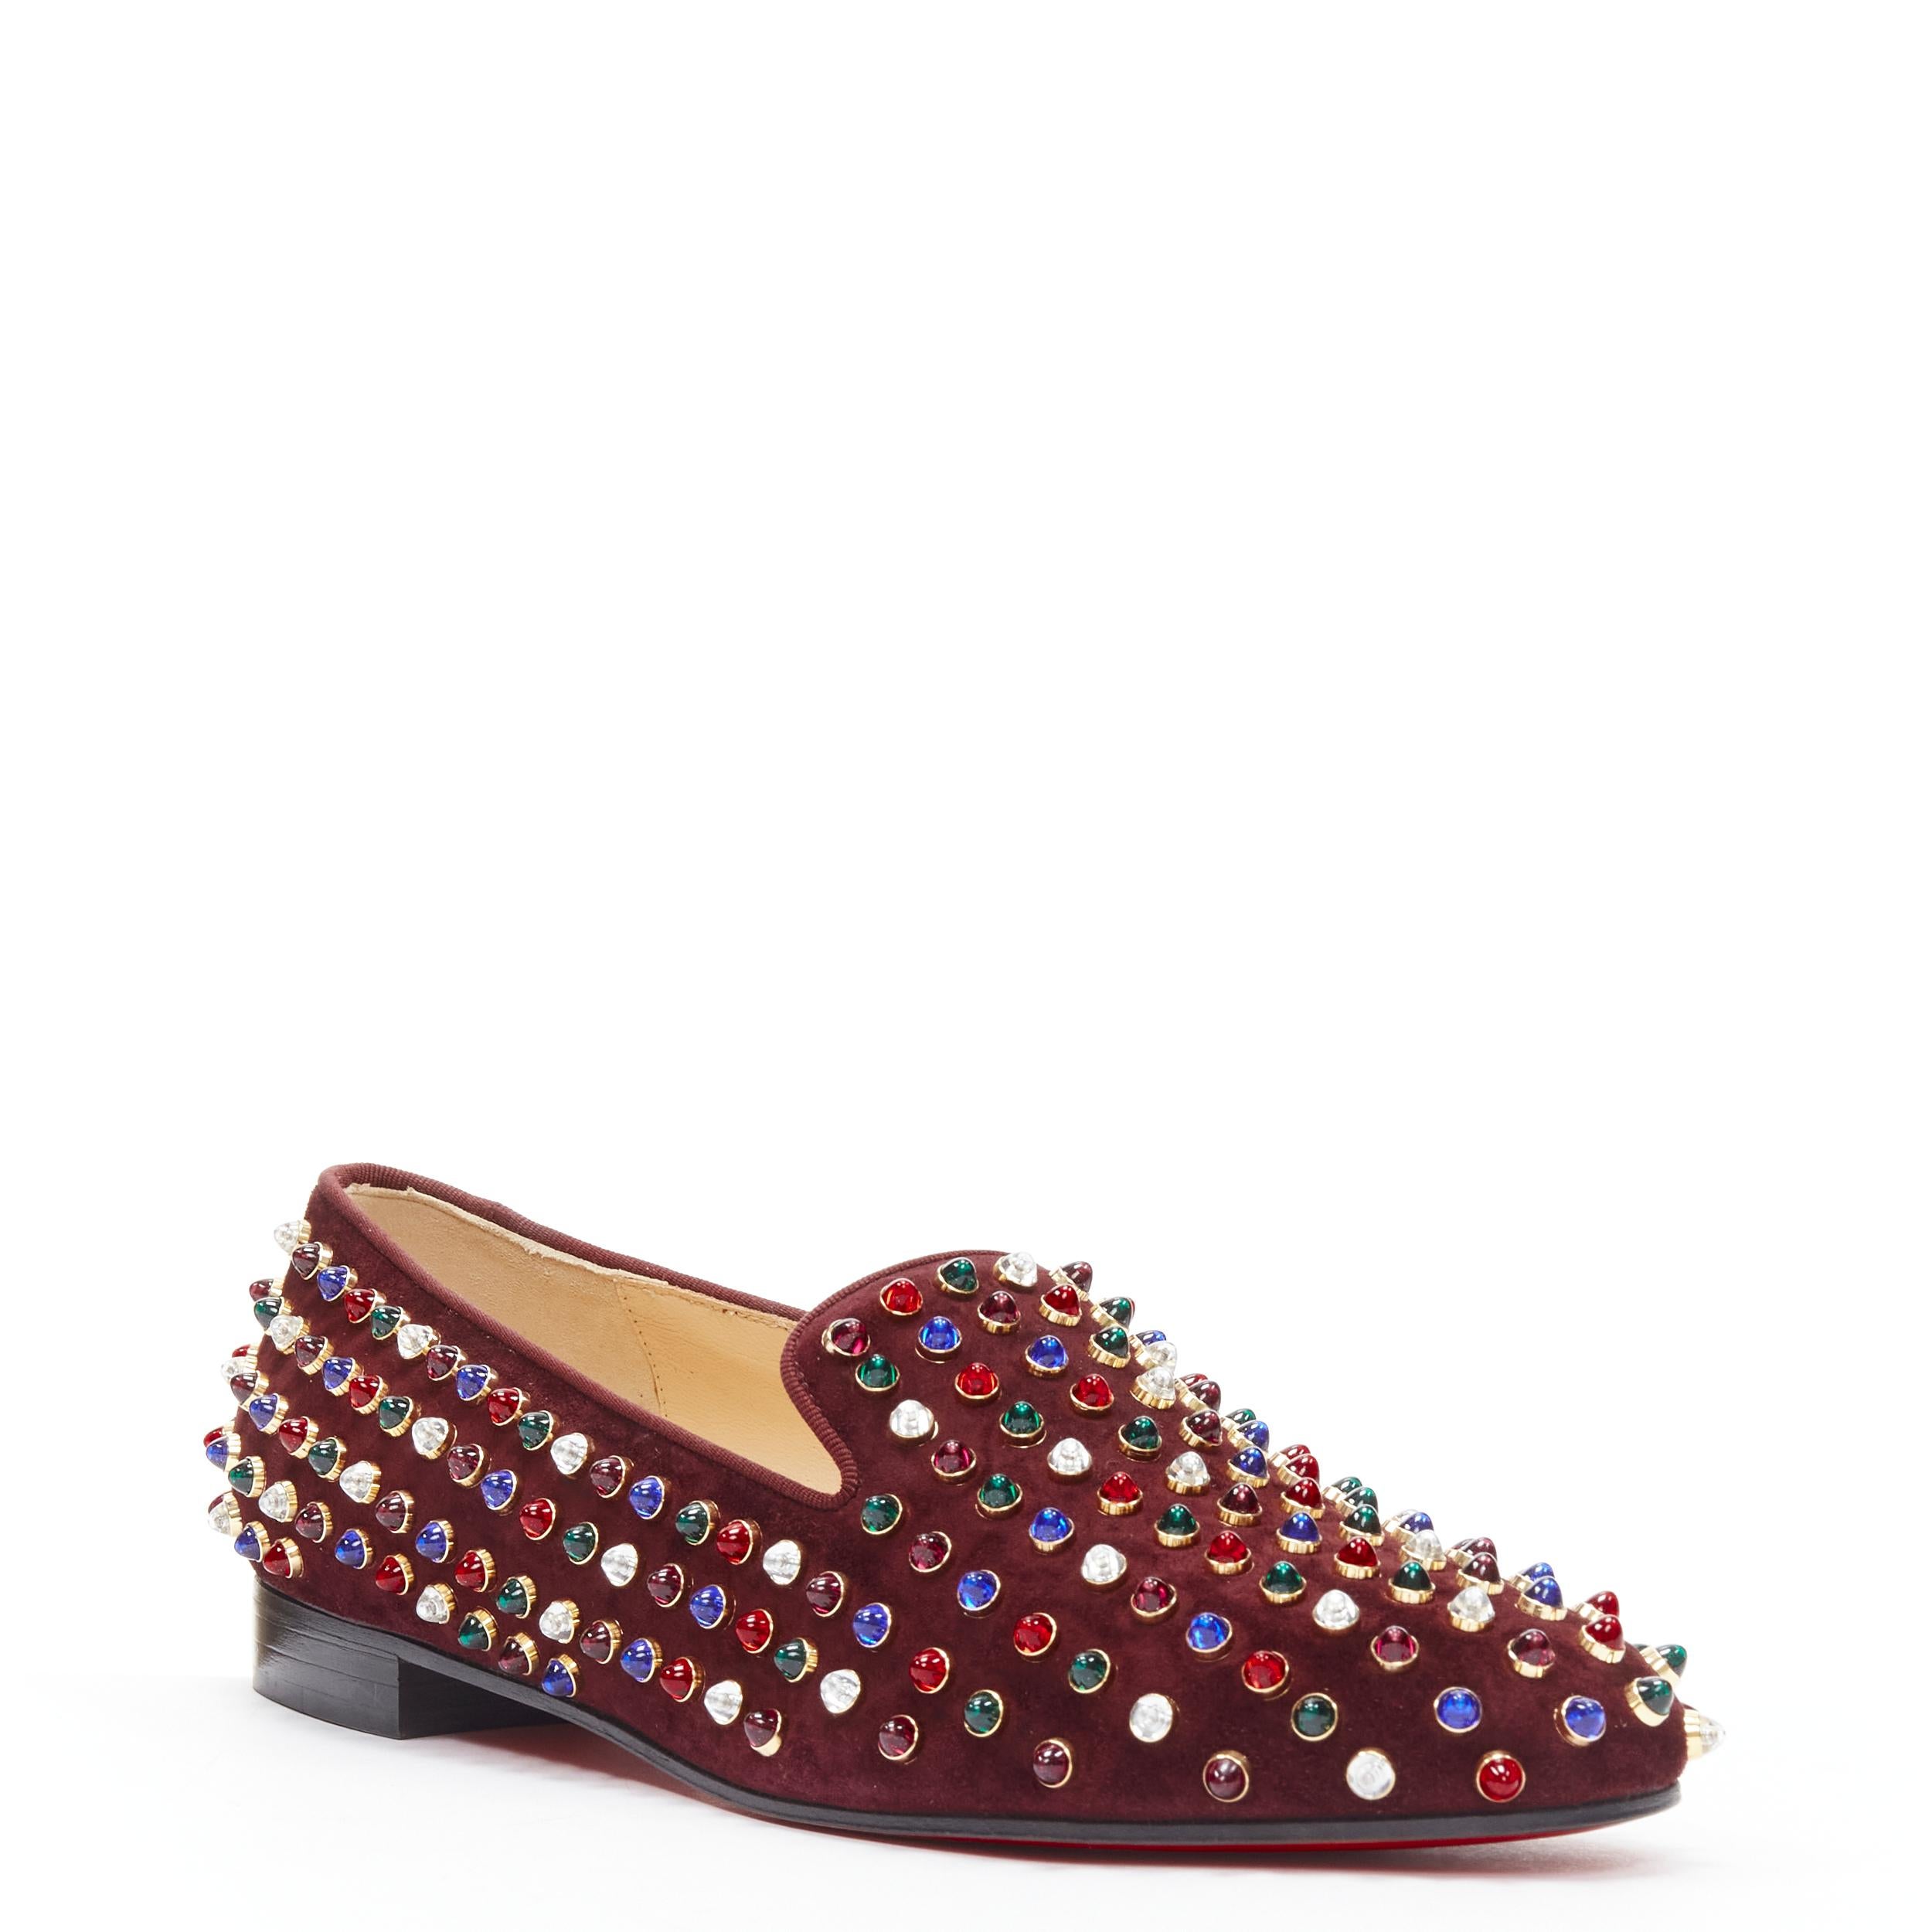 new CHRISTIAN LOUBOUTIN Jewel tone Gripoix stud burgundy red suede loafer EU39.5 
Reference: TGAS/B01965 
Brand: Christian Louboutin 
Designer: Christian Louboutin 
Material: Suede 
Color: Burgundy 
Pattern: Solid 
Extra Detail: Grosgrain piping.